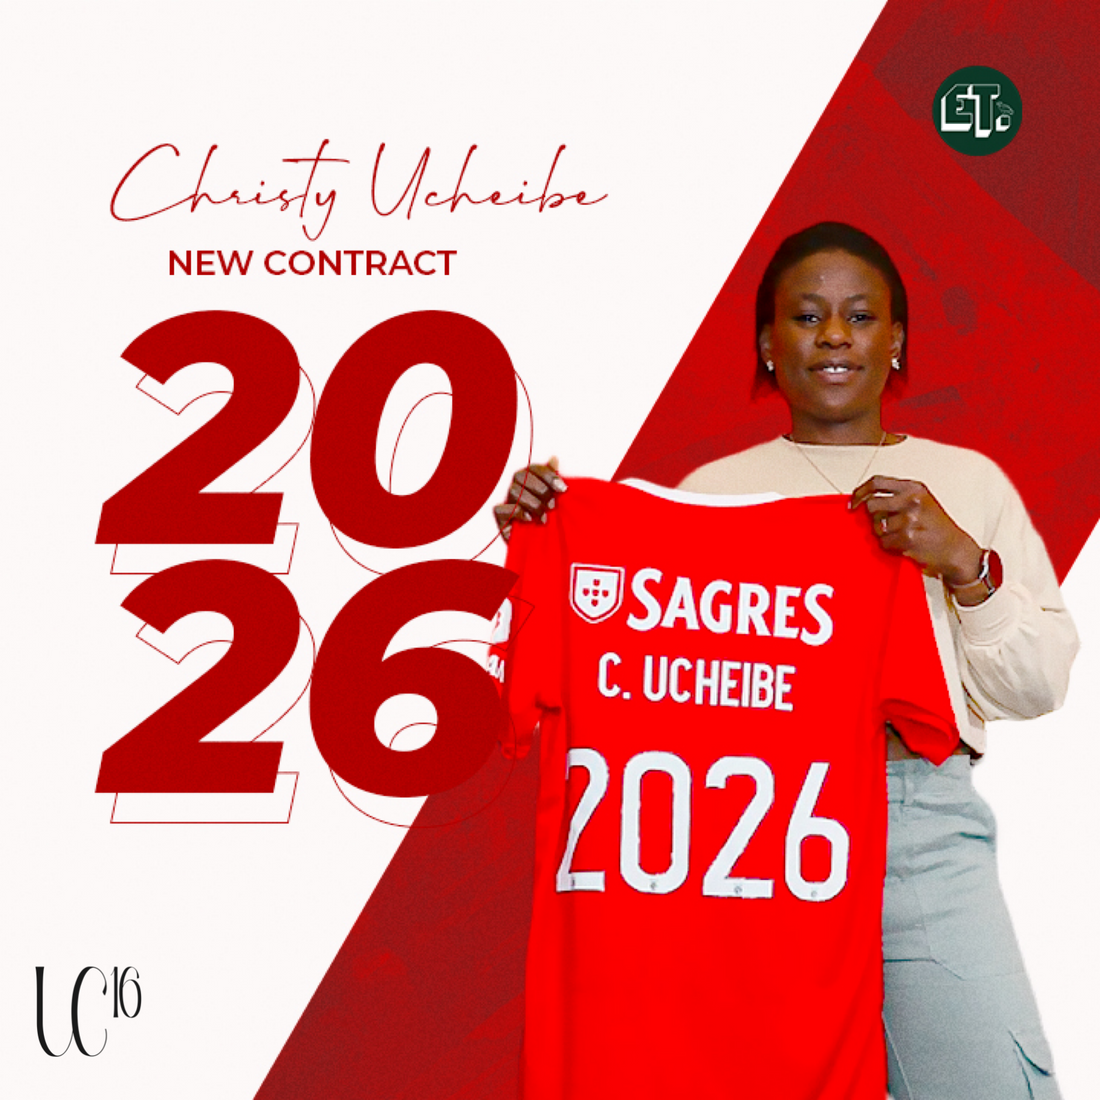 Super Falcons star Christy Ucheibe extends contract with SL Benfica